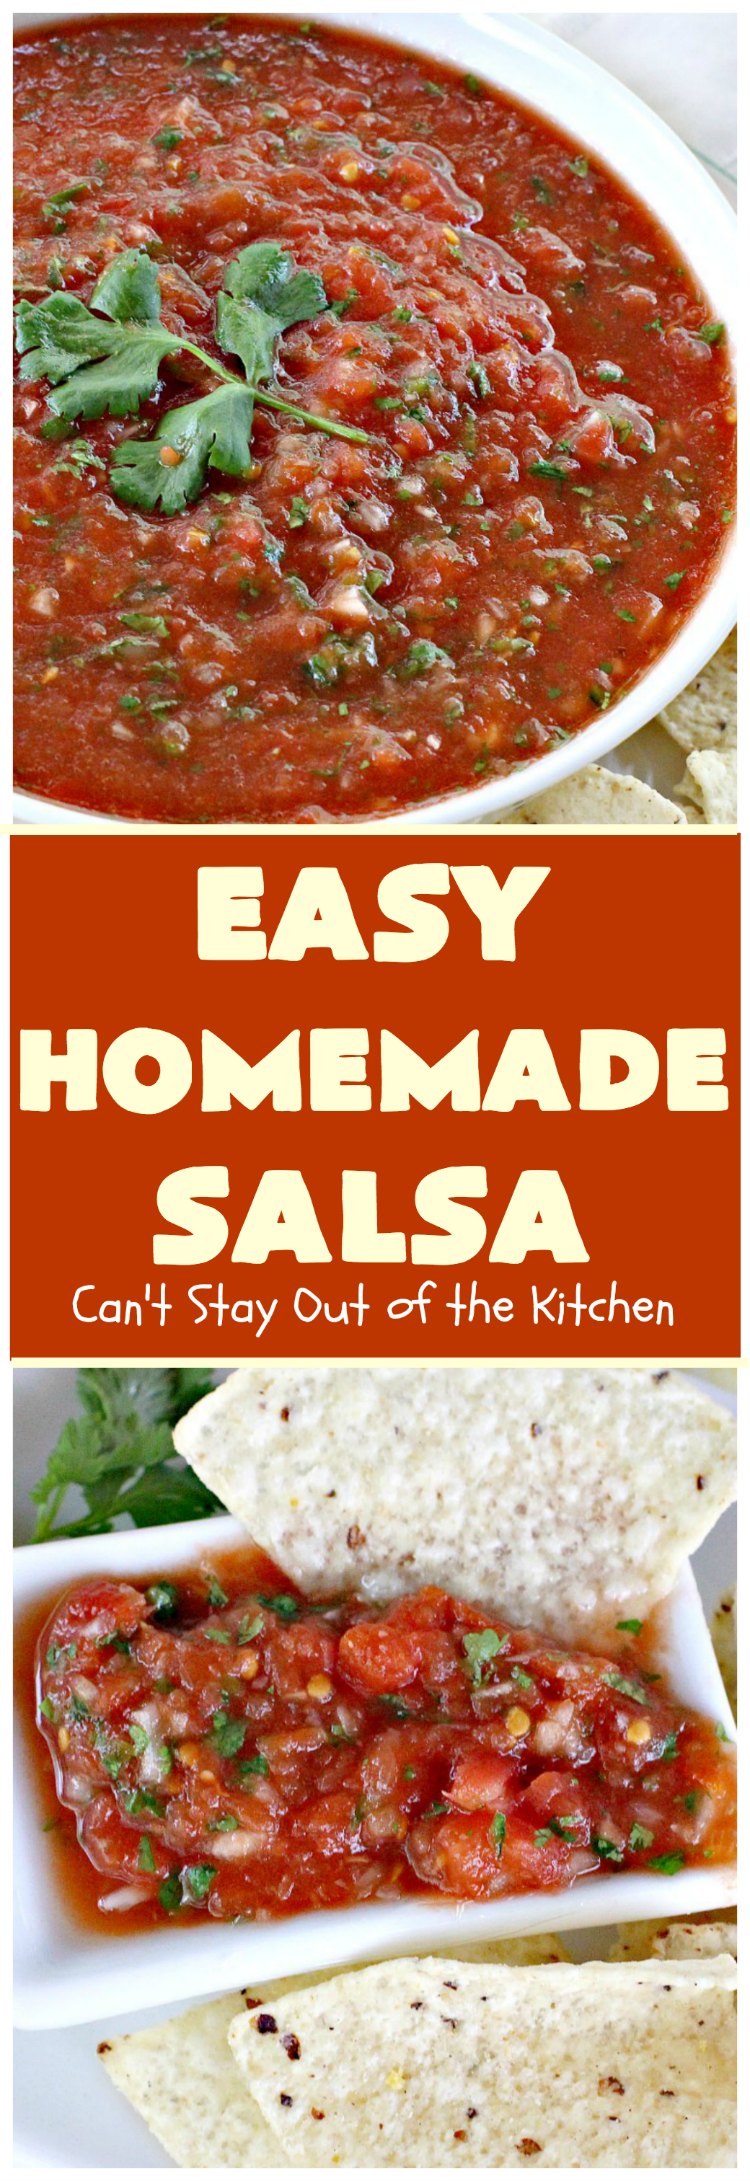 Easy Homemade Salsa | Can't Stay Out of the Kitchen | This incredibly delicious and easy 5-ingredient #salsa is terrific for any party. It's always a hit with everyone! #appetizer #TexMex #vegan #glutenfree 